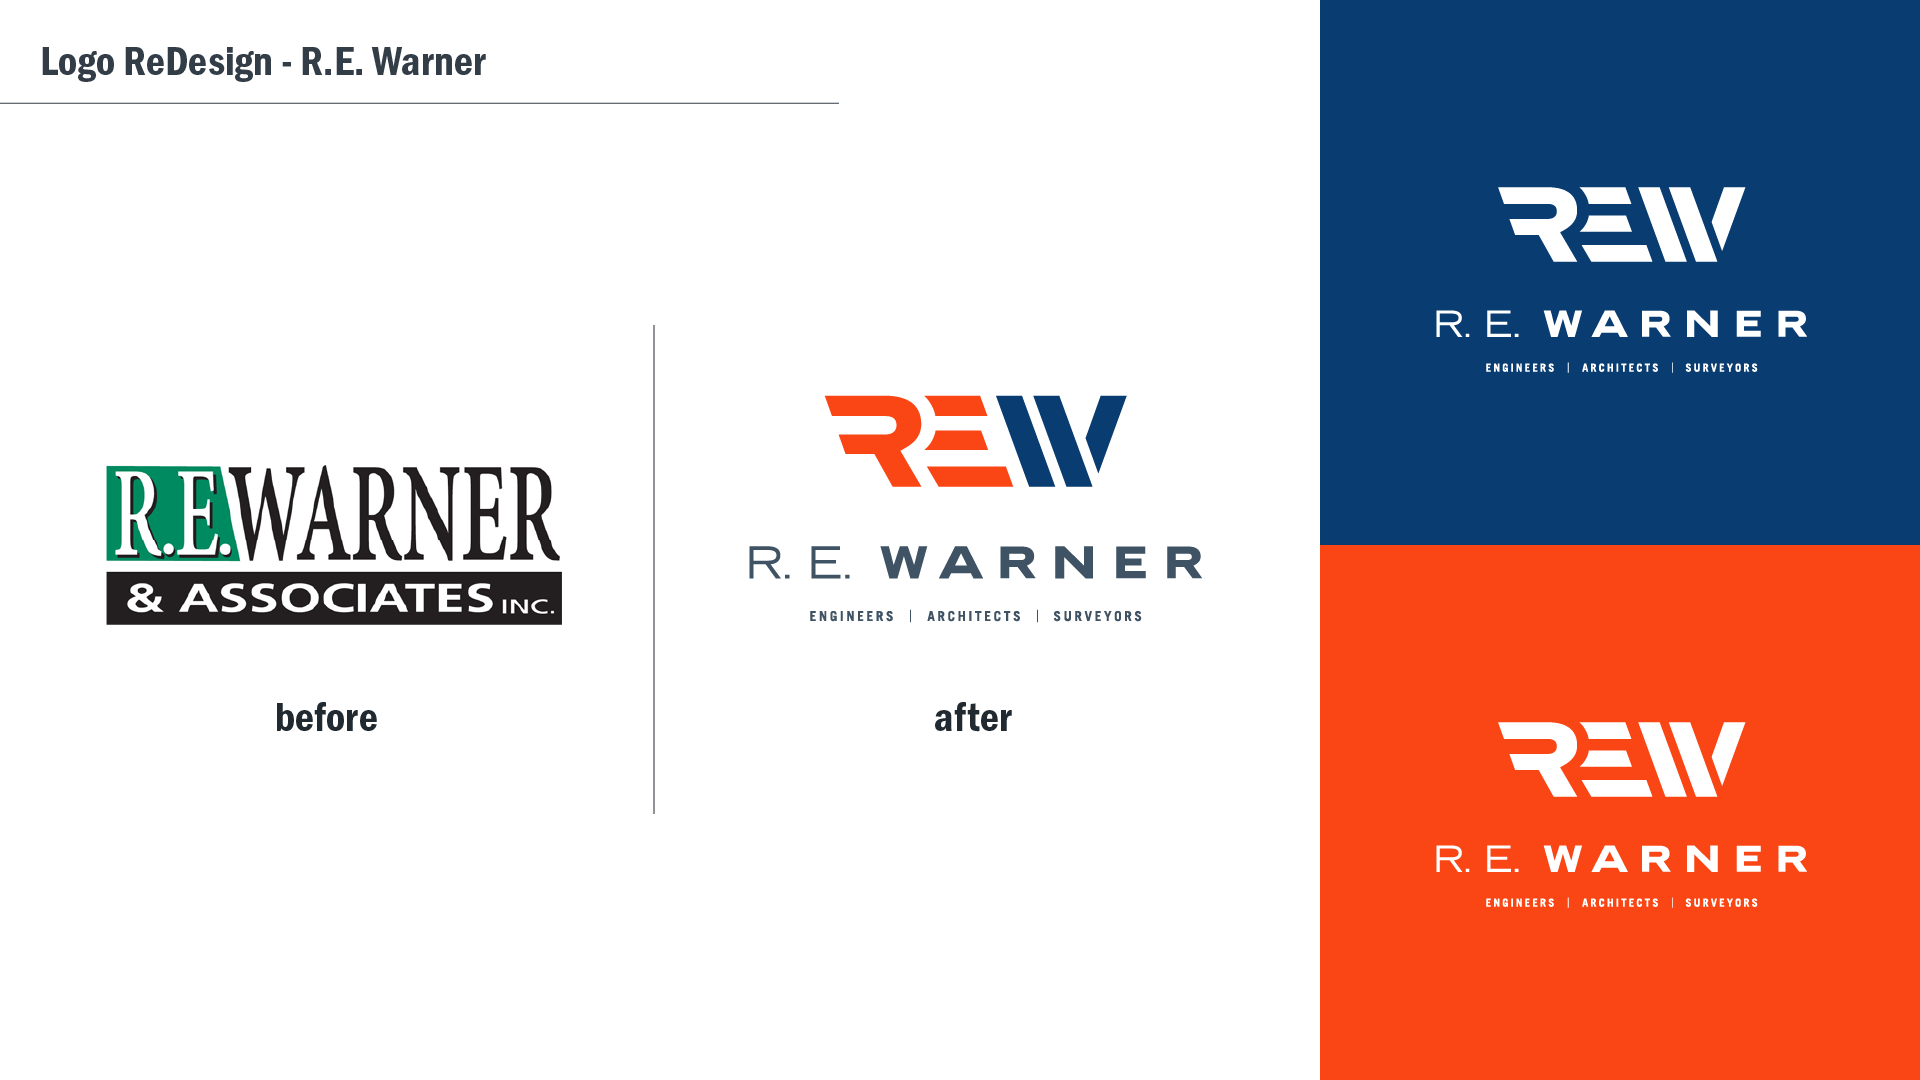 RE Warner Logo Before and After Image